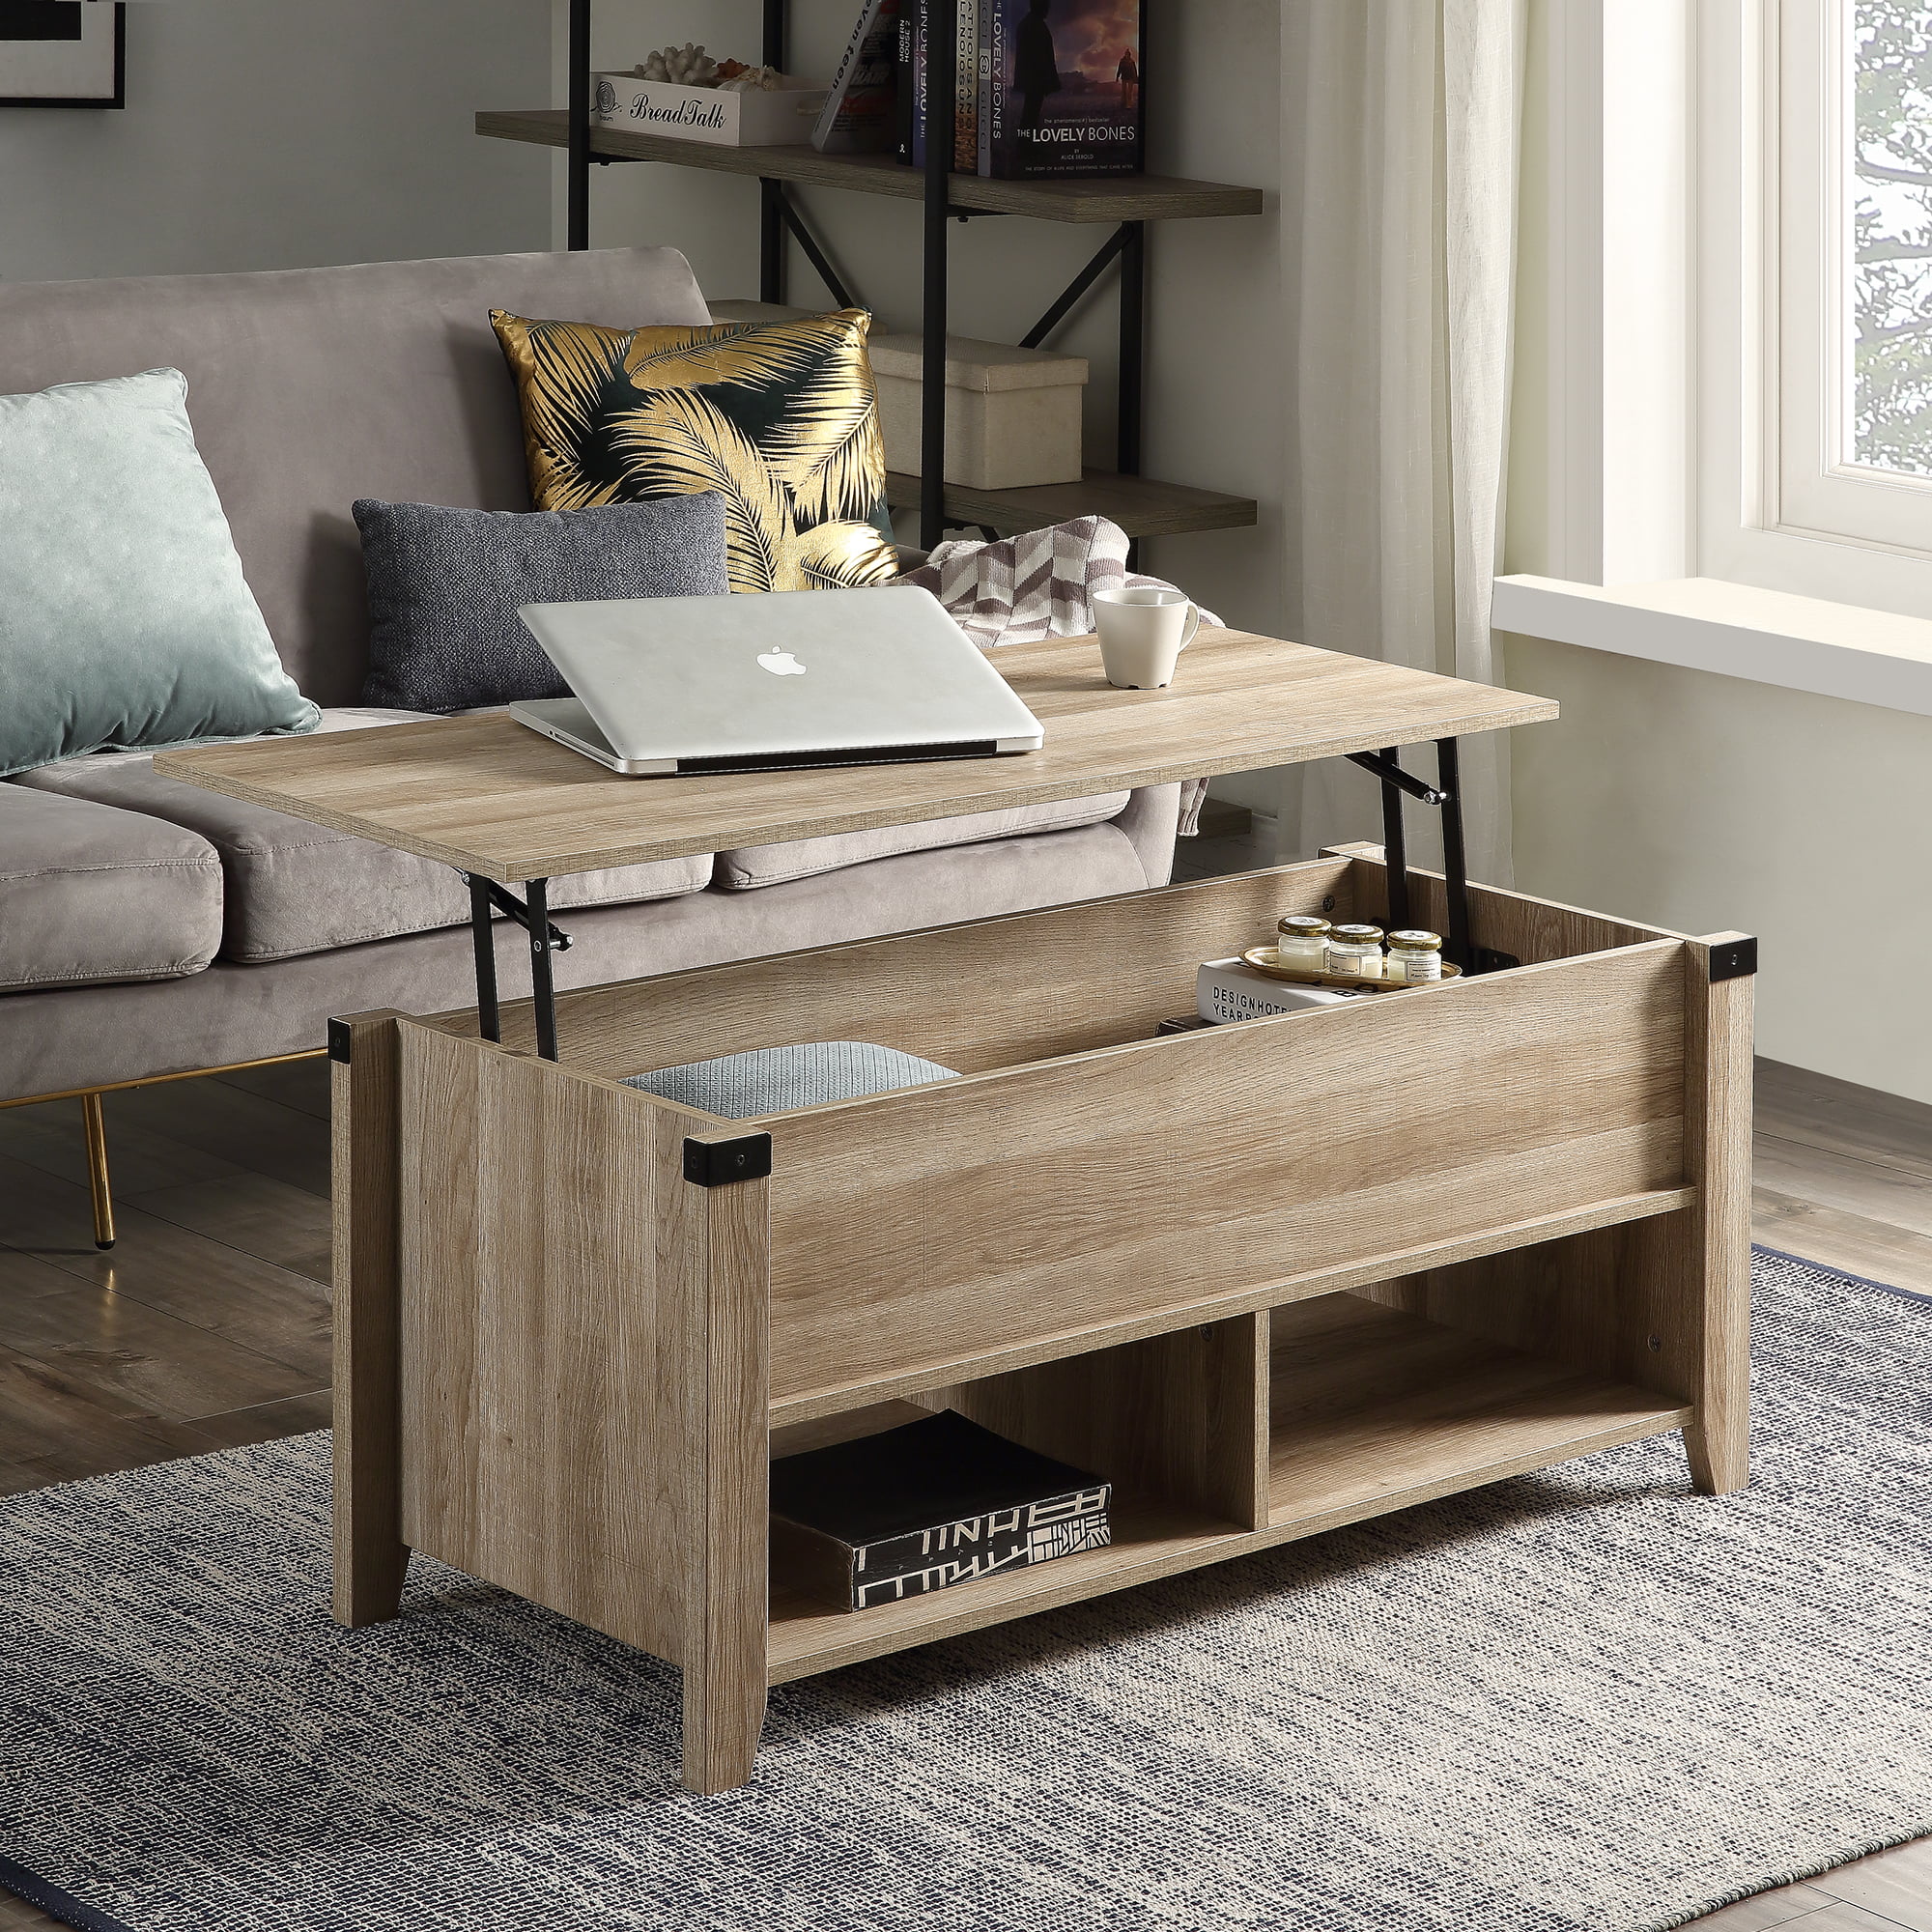 Lift Coffee Table, Adjustable Coffee Table with Hidden Storage and Open